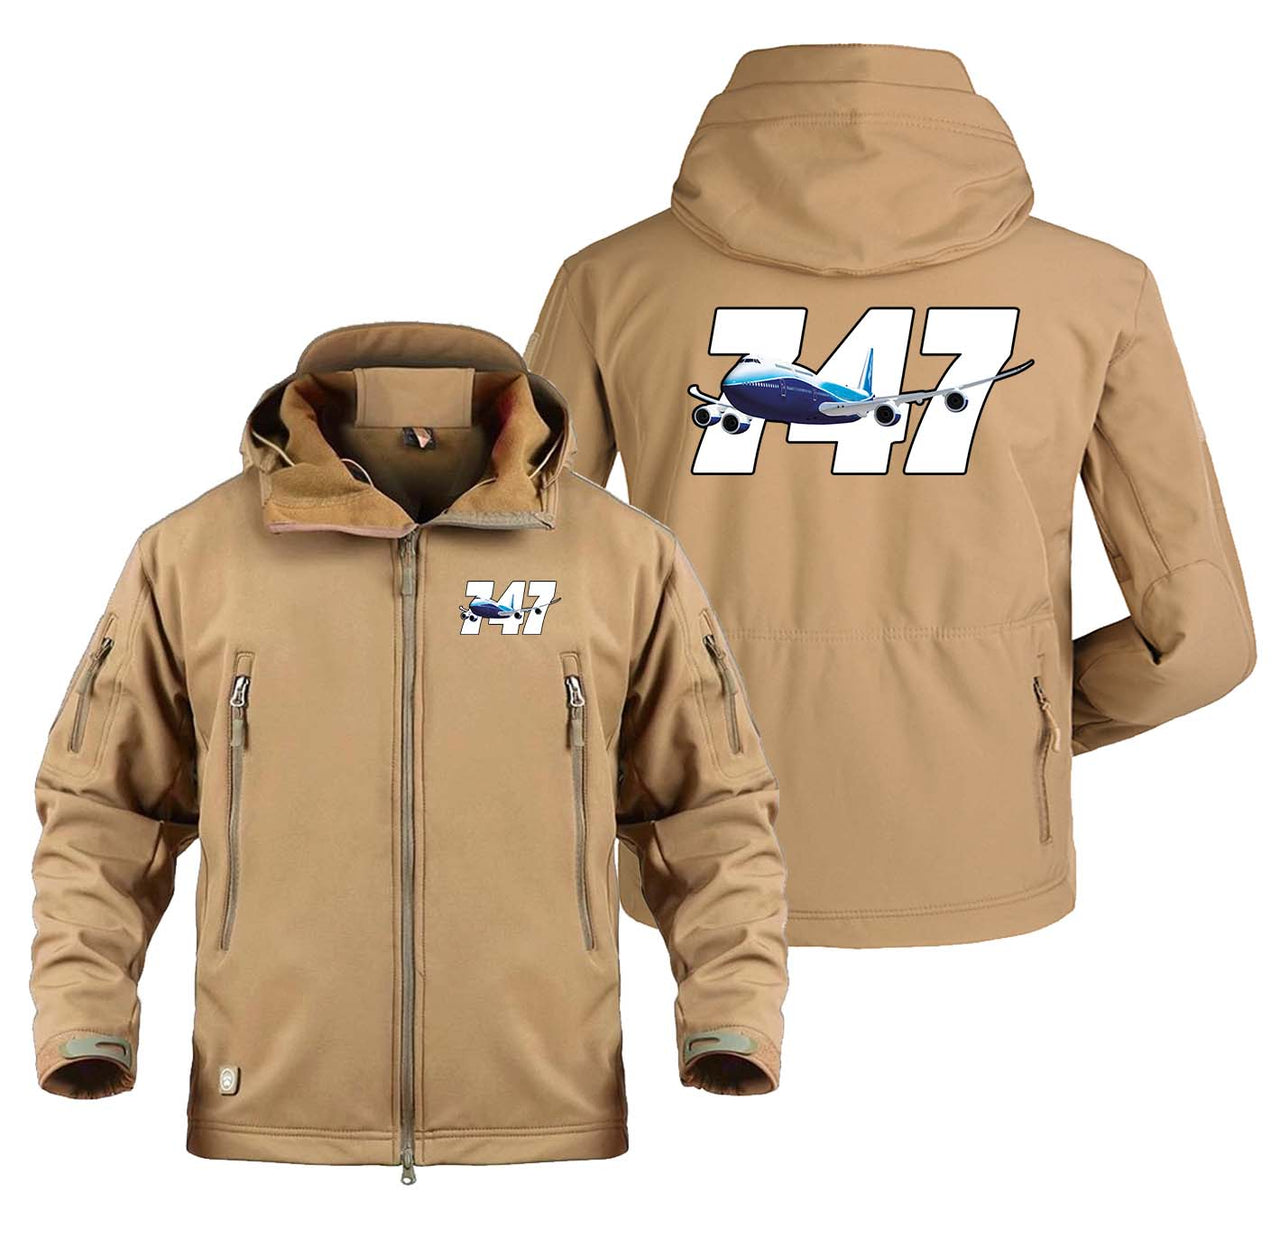 Super Boeing 747 Designed Military Jackets (Customizable)